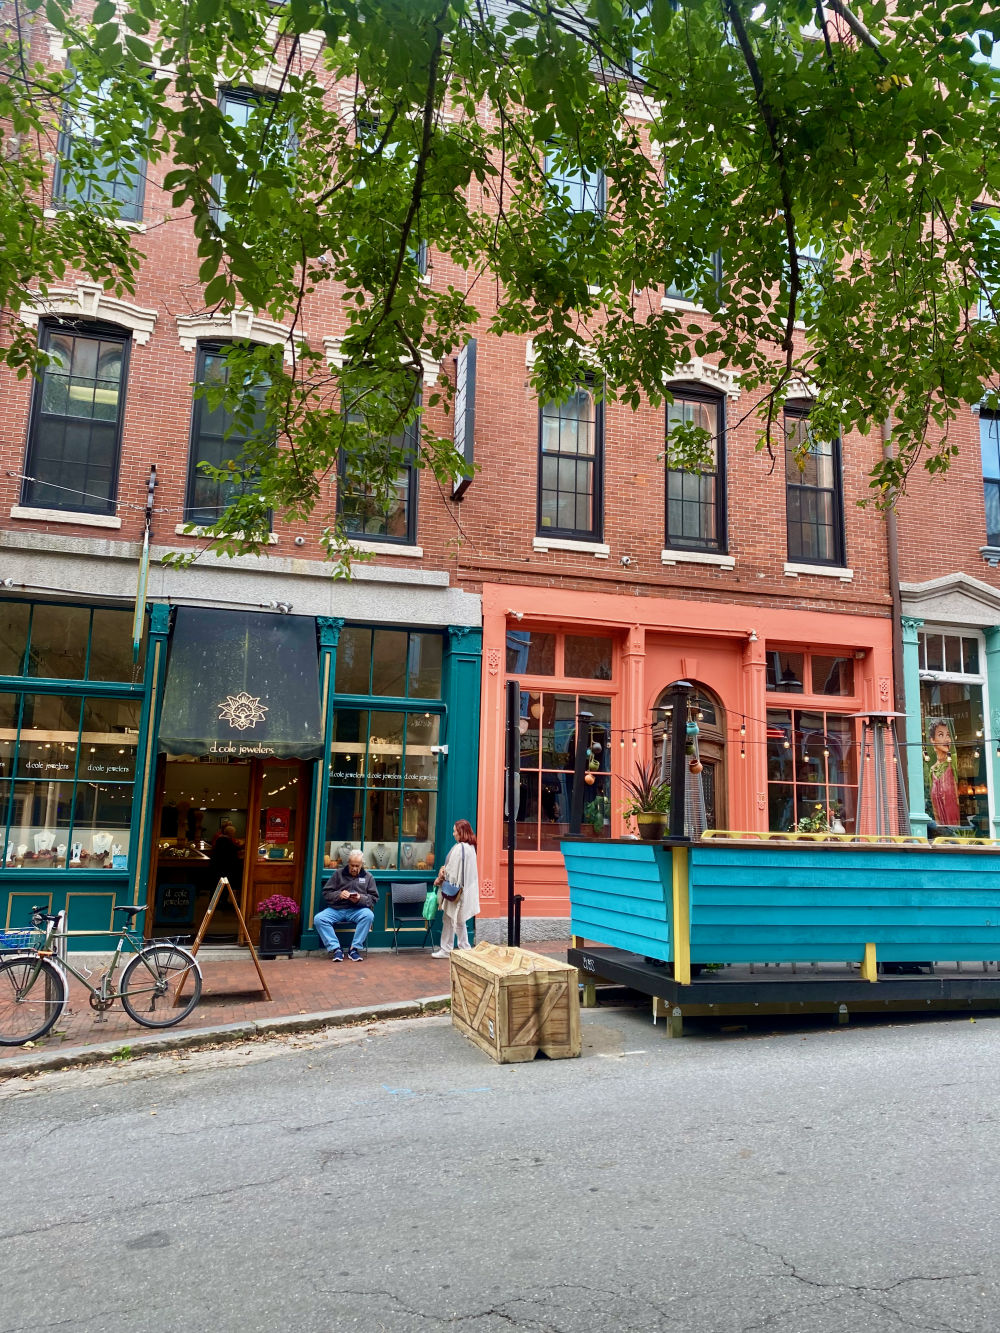 Shopping streets in Portland, Maine